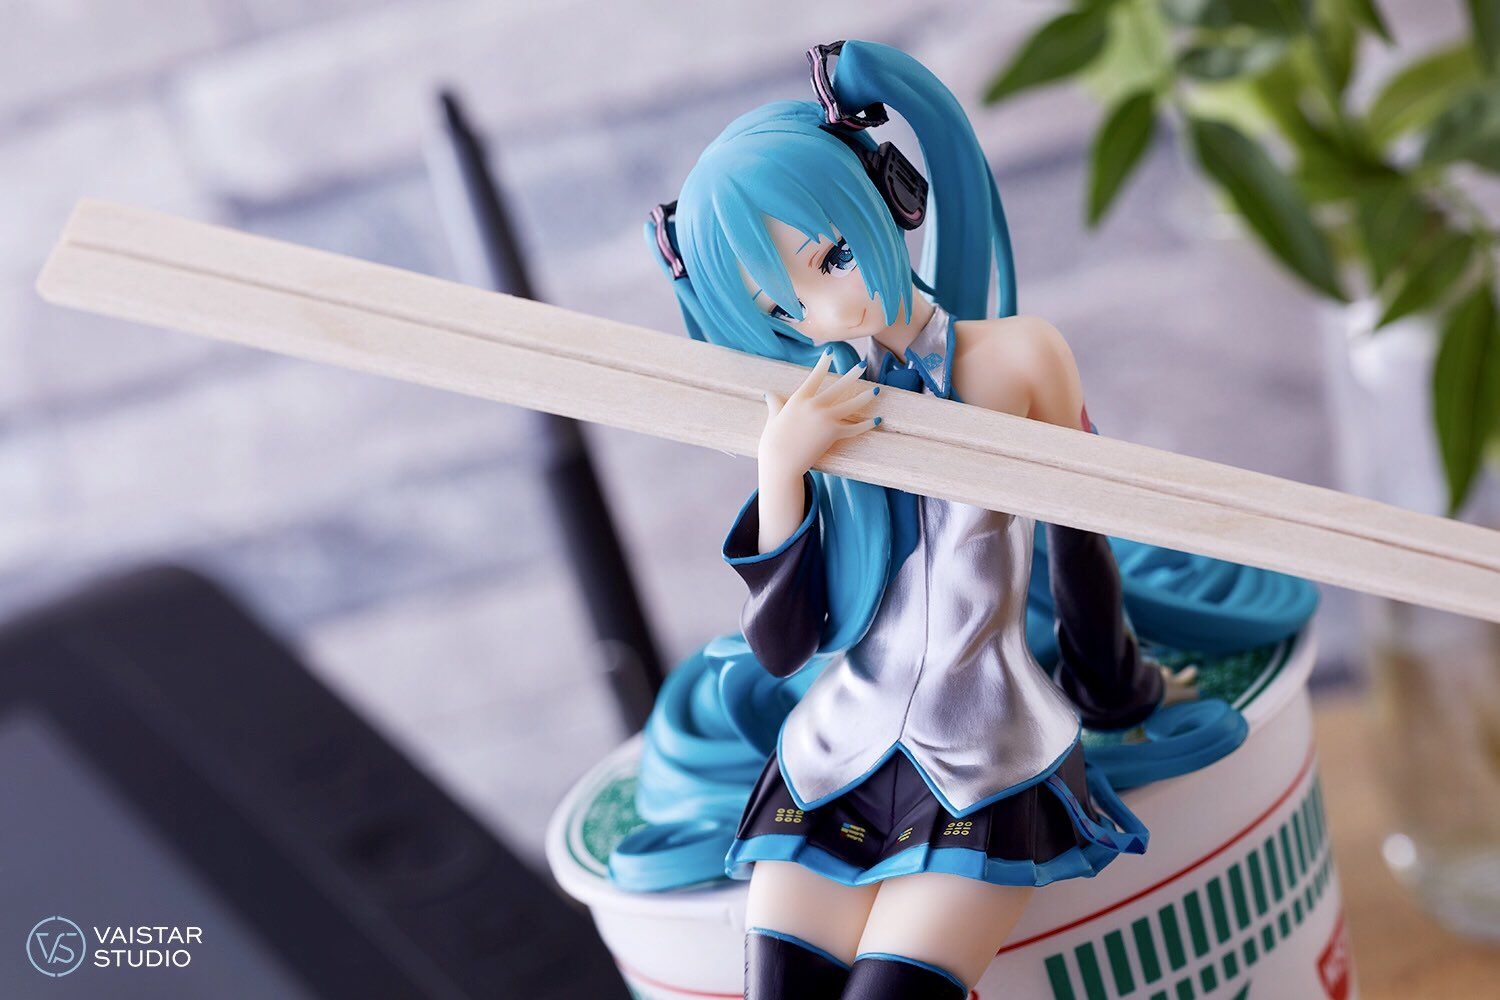 [Hatsune Miku] Nuyoru Stopper Figure, too much color and become a topic erotic 15